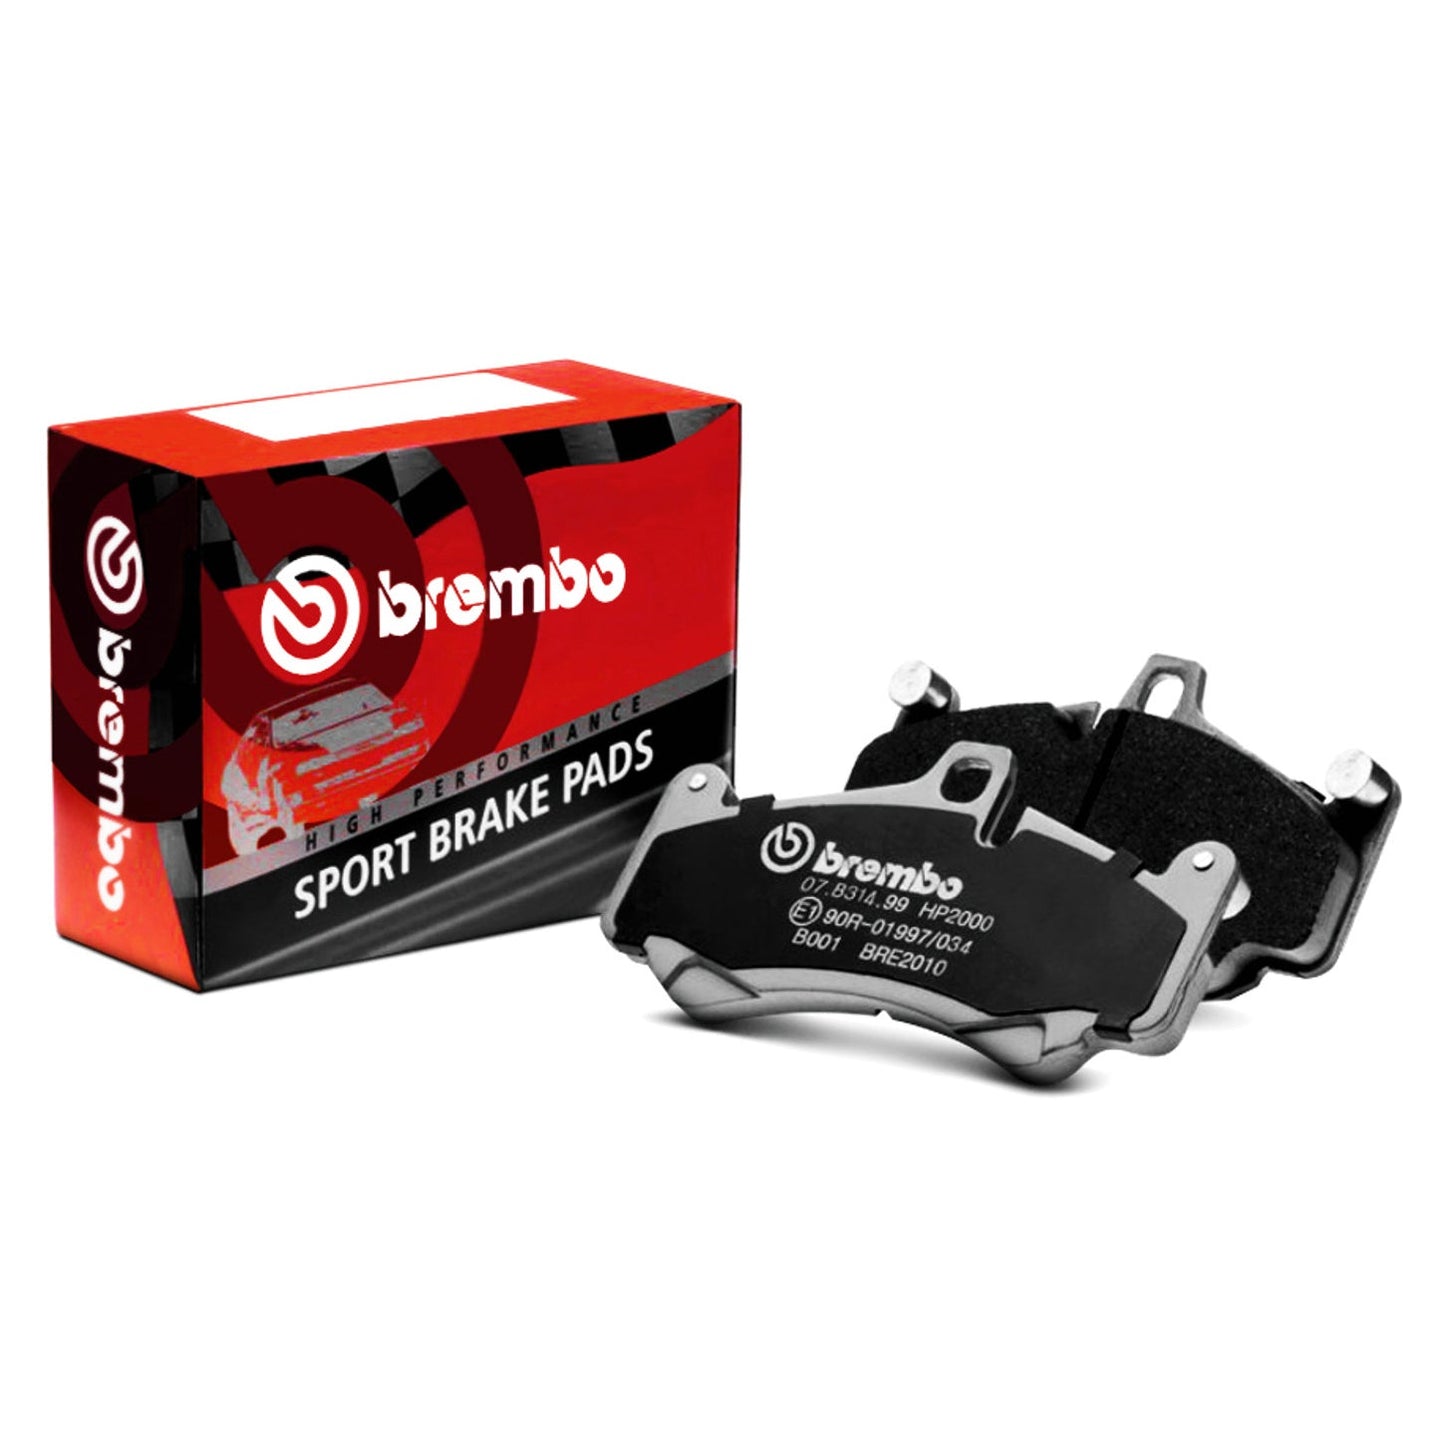 Brembo Sport HP2000 Front Brake Pads for Toyota Avensis (T22) 2.0 D-4D 110bhp (97-03)